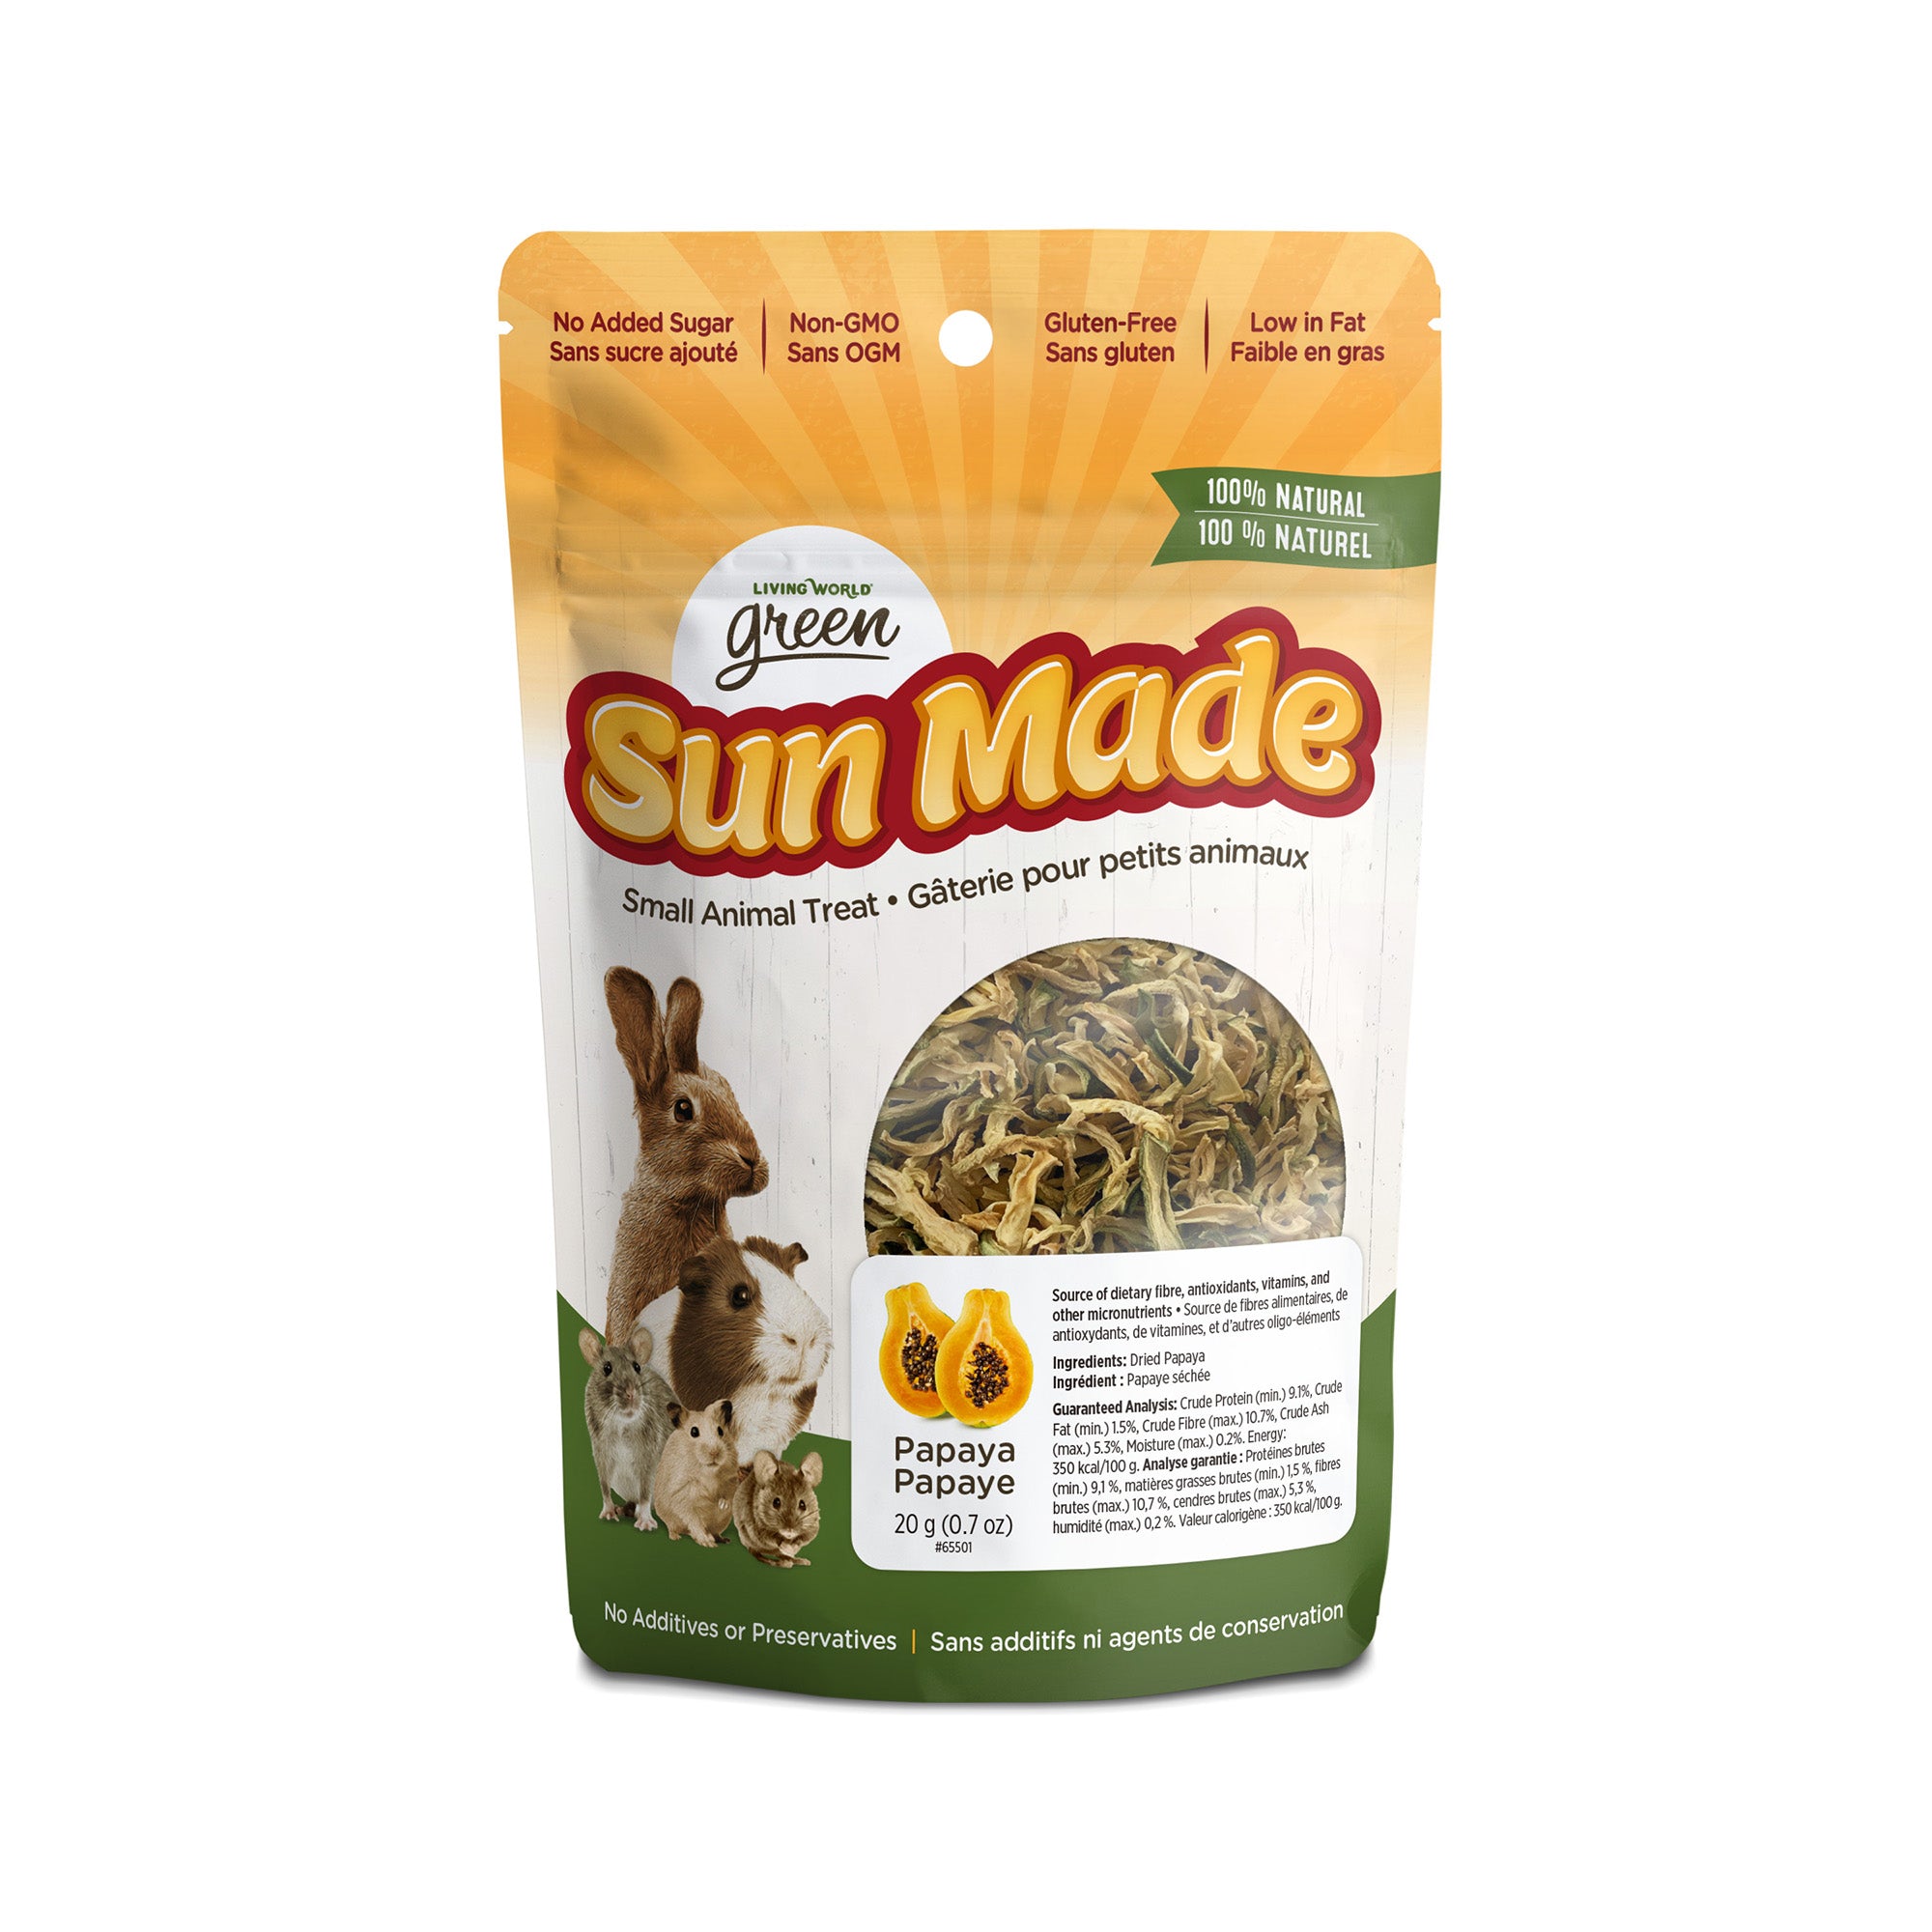 Gâteries Sun Made Living World Green pour petits animaux, papaye, 20 g (0,7 oz)